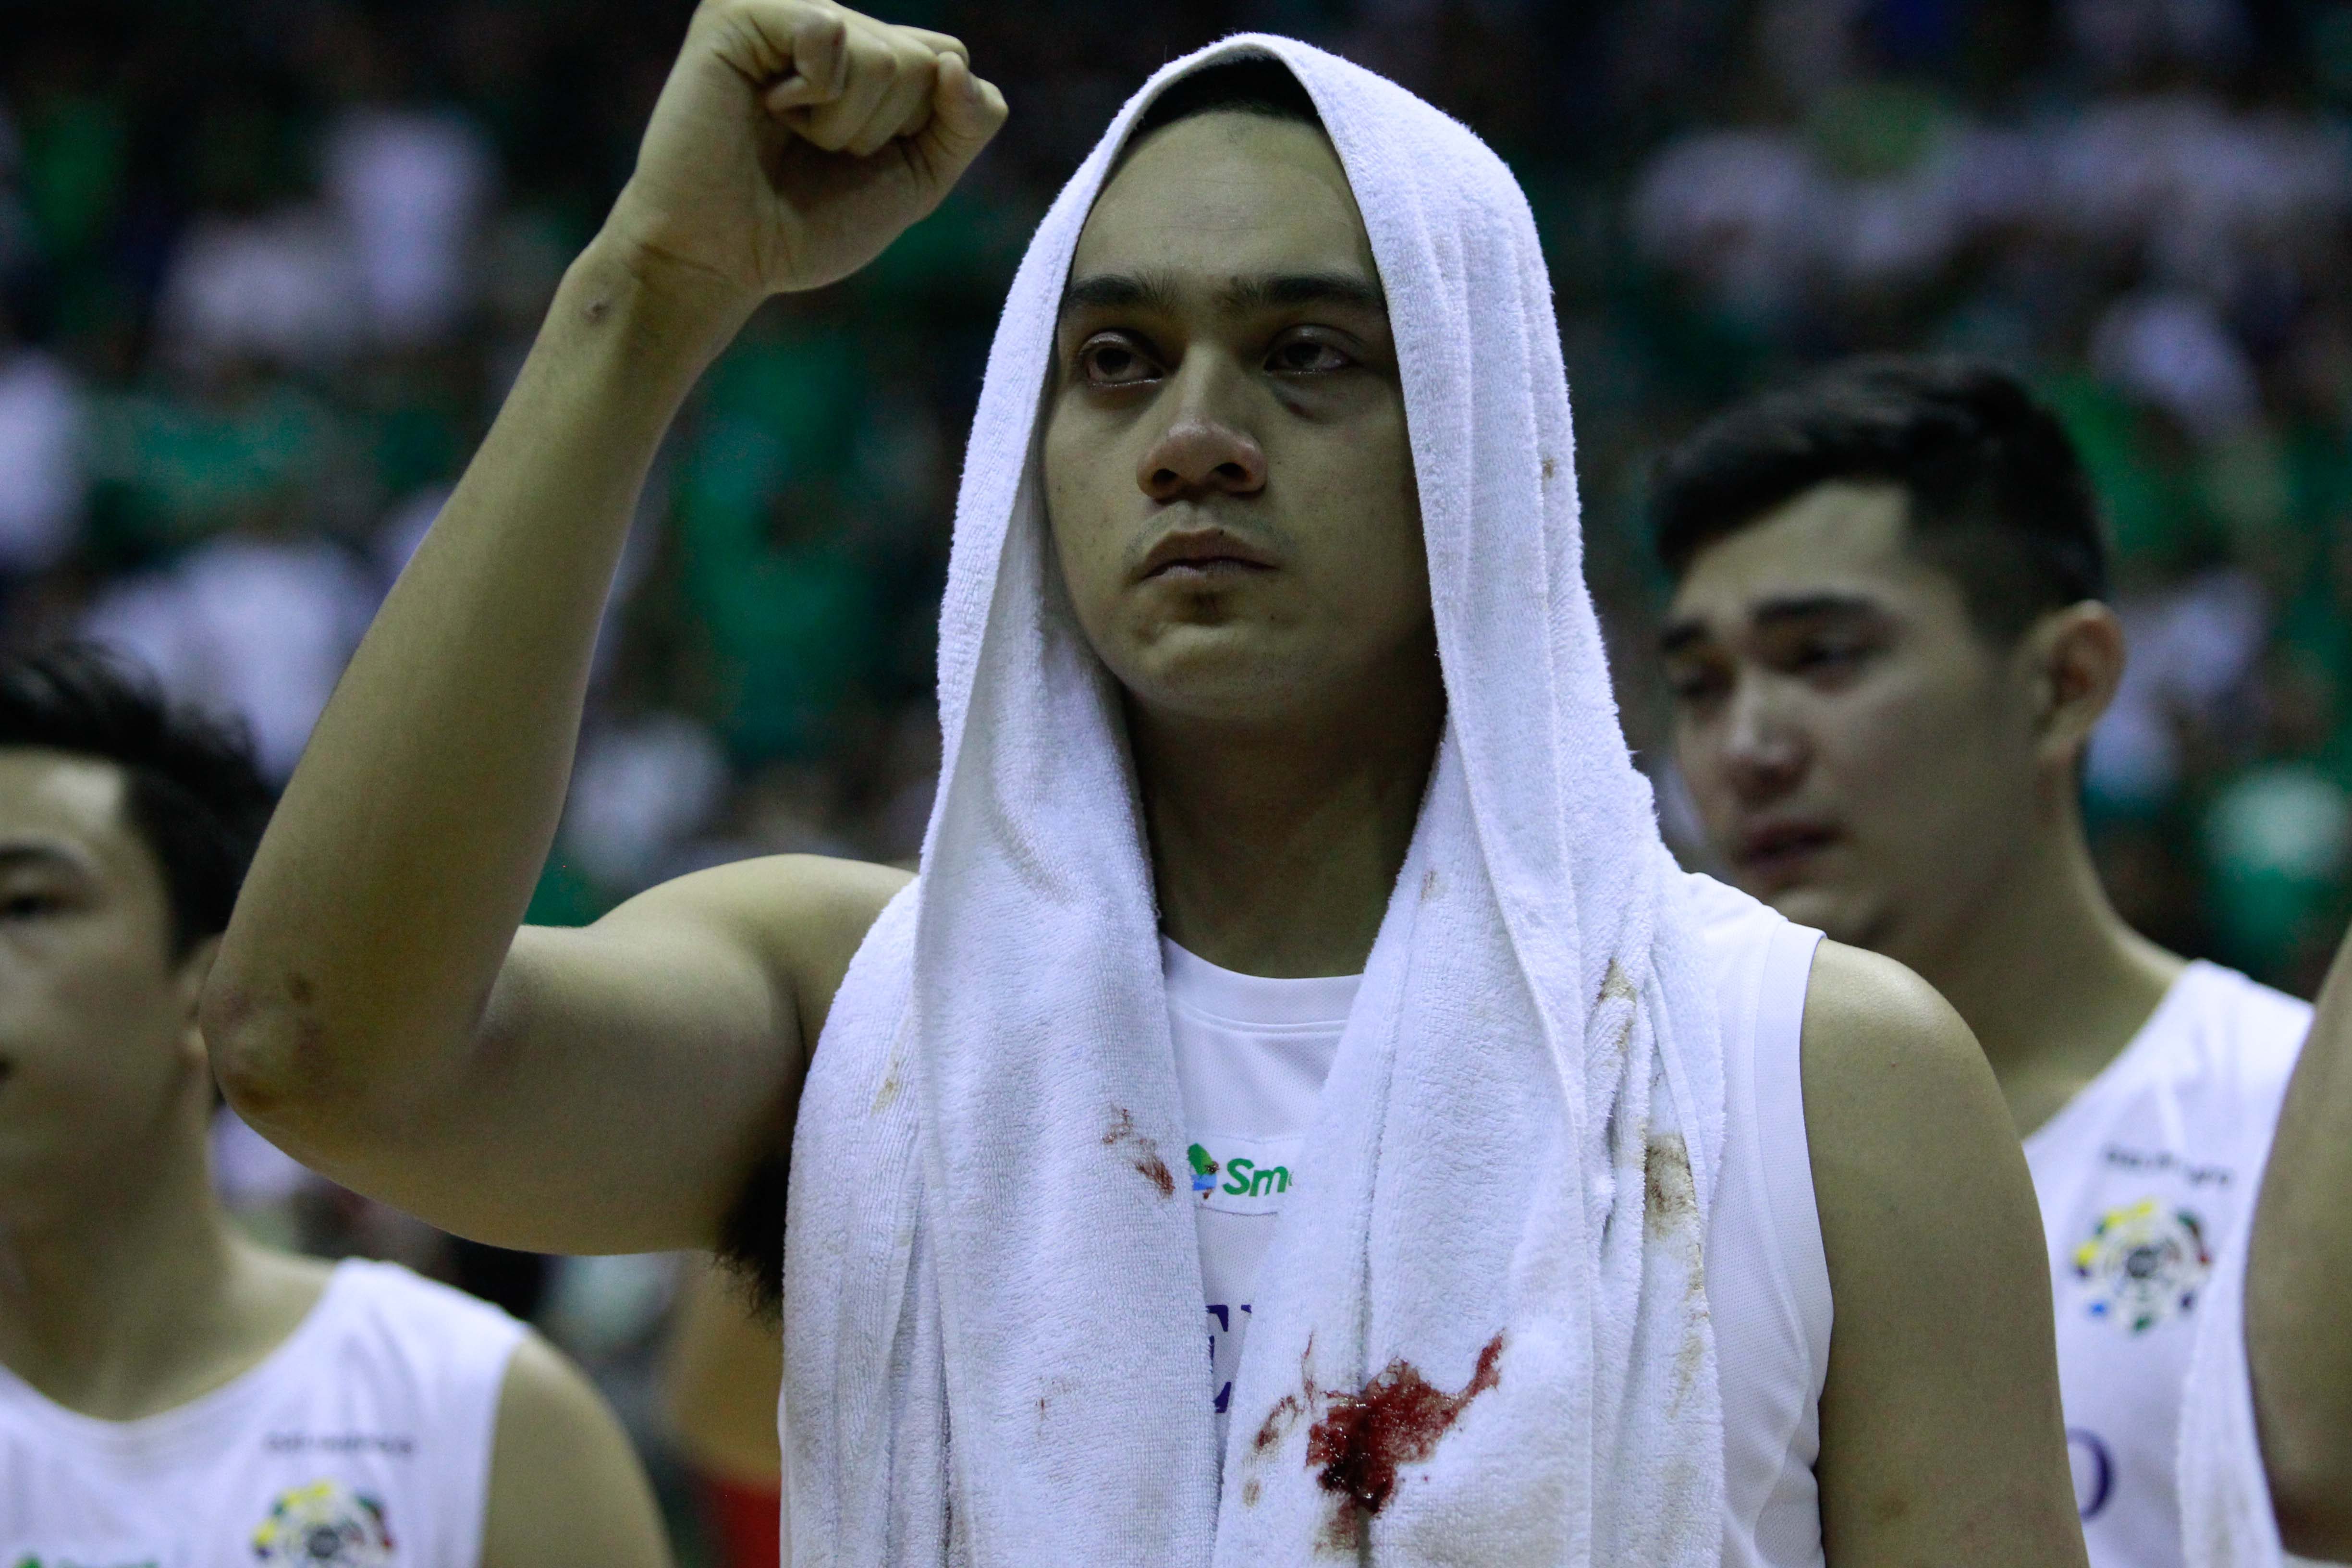 BLOODIED. A forlorn Vince Tolentino sings his school hymn, his bloodied towel seen after he got hit by an inadvertent elbow by Ben Mbala early in the game. Photo by Eduardo Solo/Rappler 